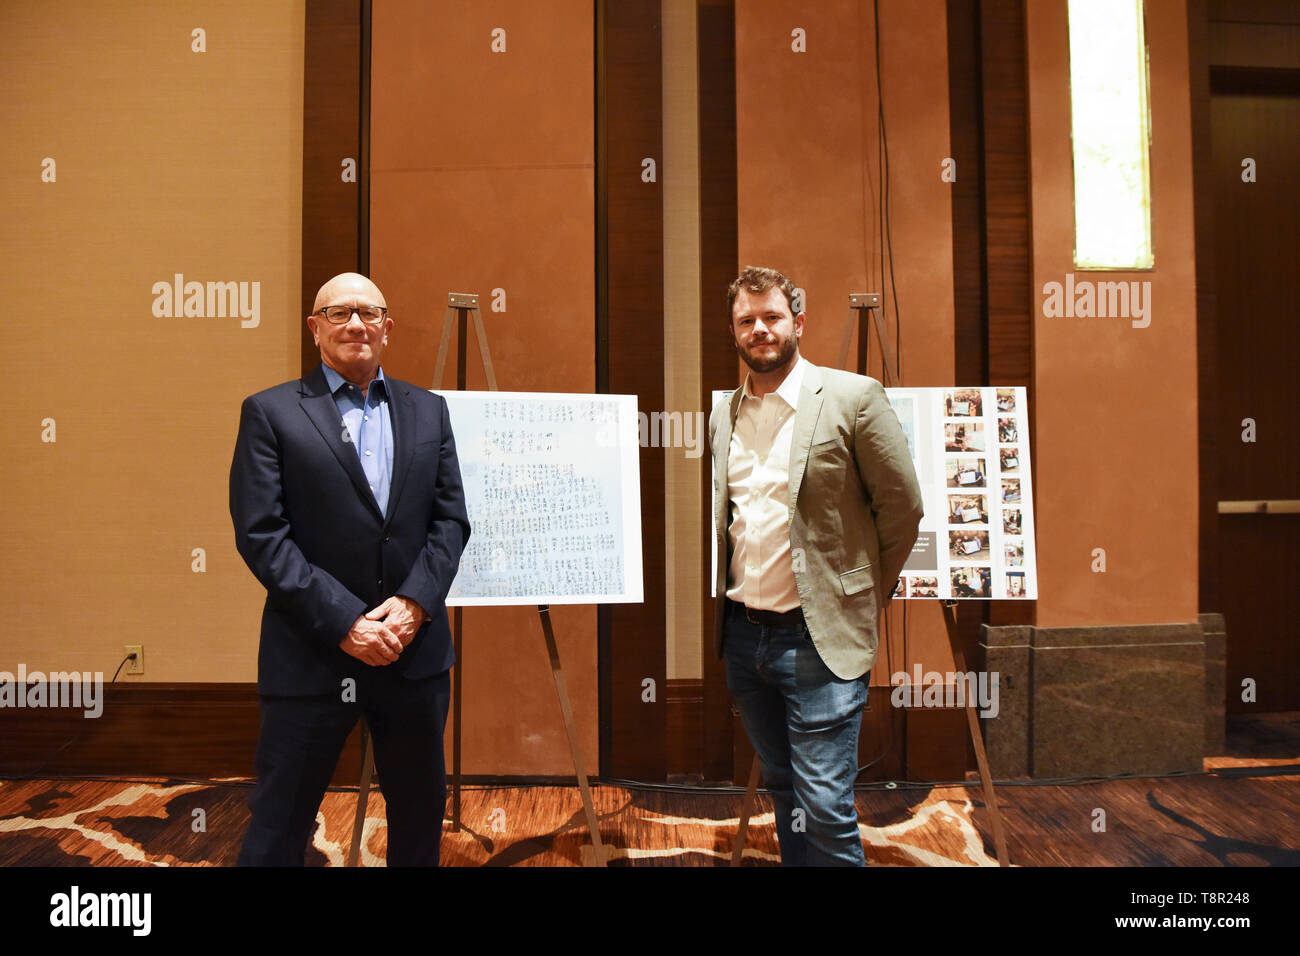 (190514) -- NEW YORK, May 14, 2019 (Xinhua) -- James Bryant (L) and his son Ben Bryant pose in front of the memorial posters at the 4th Sino-American Second World War Friendship and Flying Tiger History Conference in Las Vegas, the United States, May 11, 2019. James Bryant will never forget the day when his 93-year-old father went back to his bedroom and came back with a flight brief case containing papers related to the training and assignments he took as a U.S. Flying Tiger pilot during the World War II. As a 'remarkable' yet 'humble' man and a loving father, James E. Bryant did not show an Stock Photo